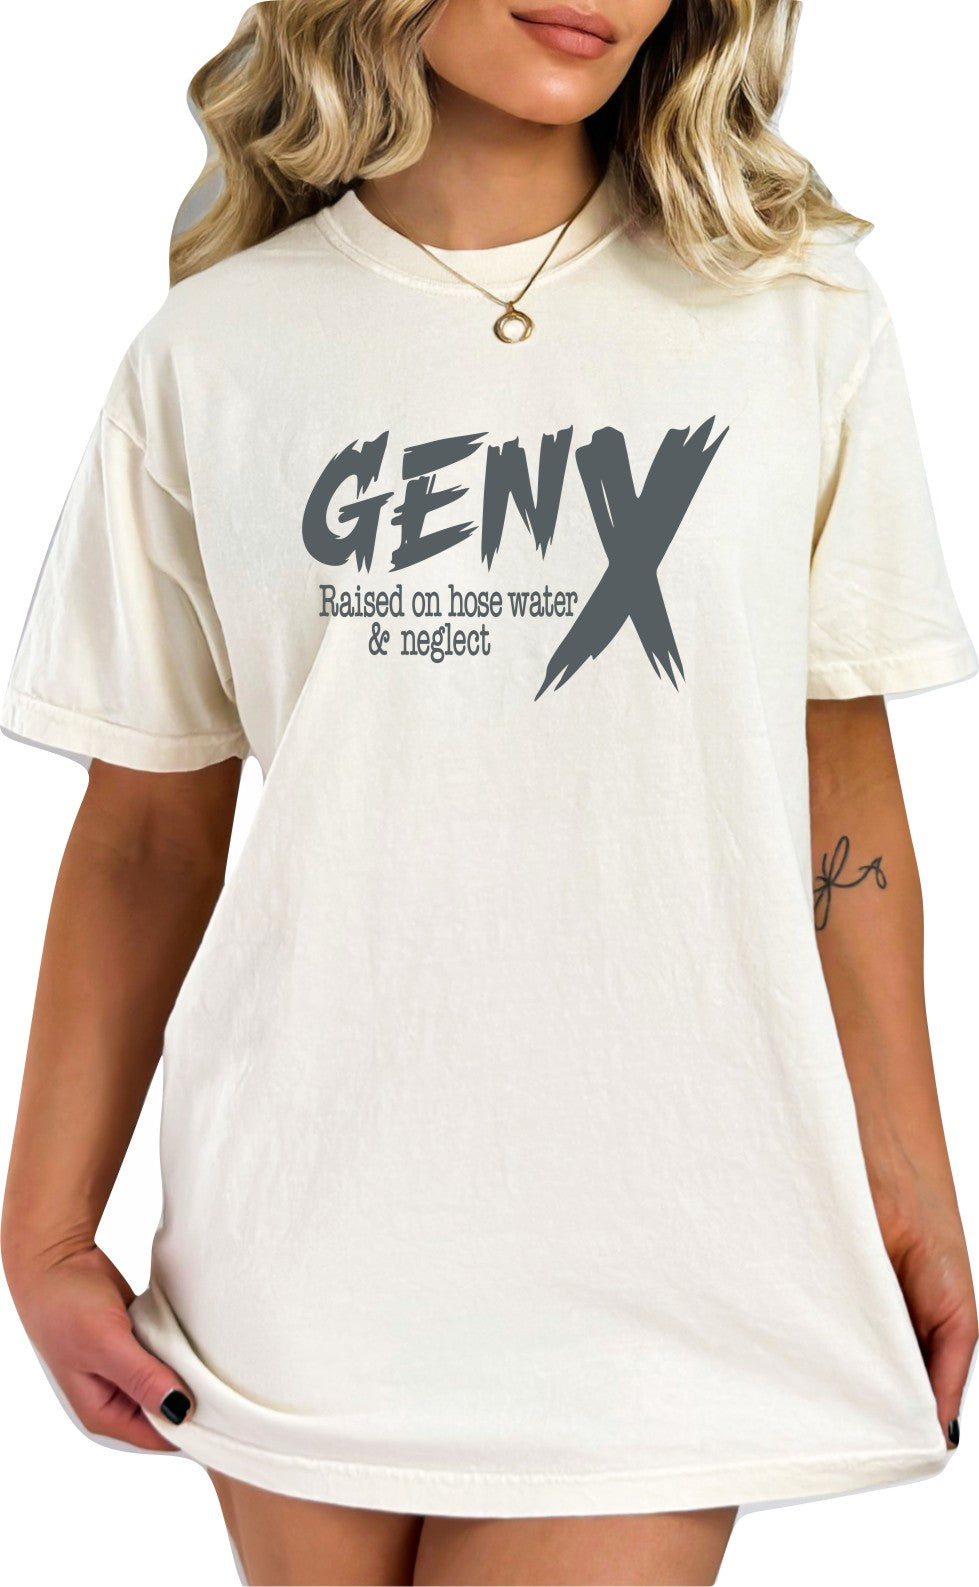 Generation X Retro Women's T-Shirt Raised on Hose Water and Neglect